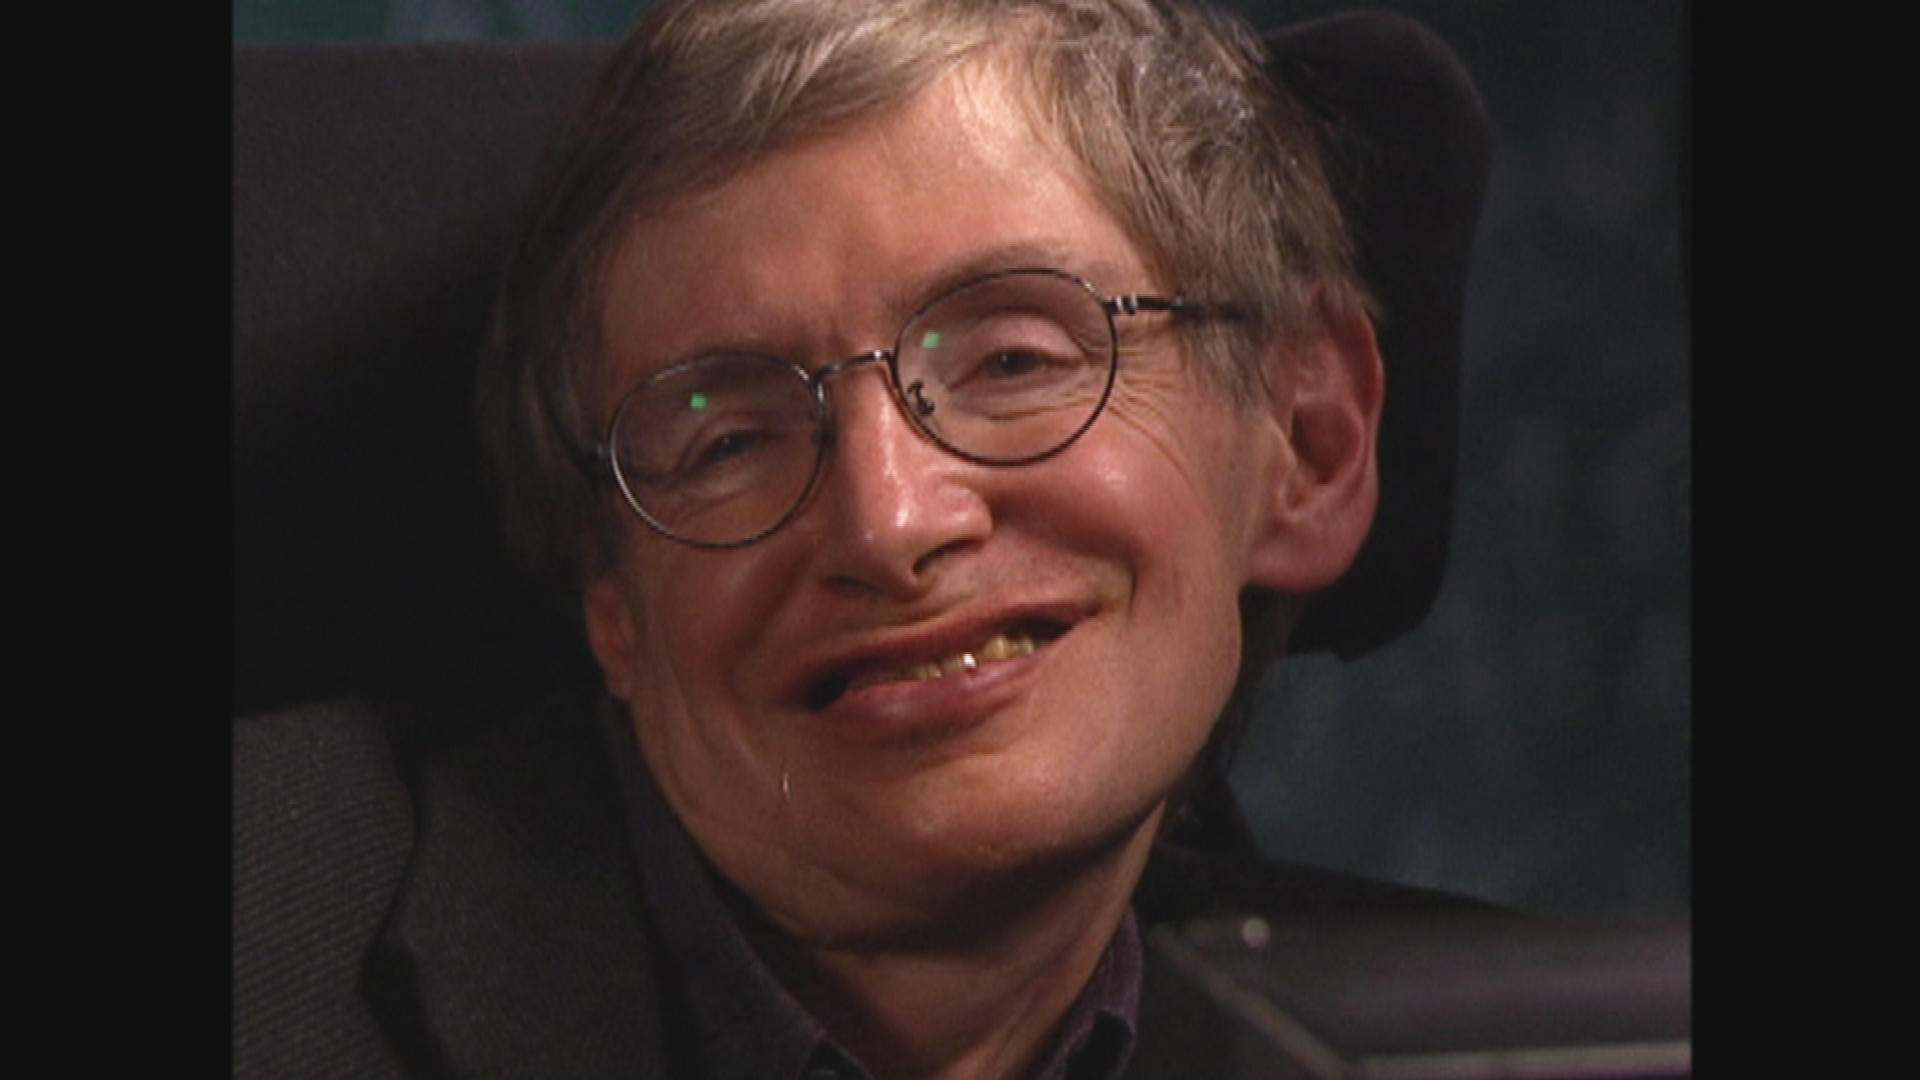 Stephen Hawking: The 60 Minutes interview - CBS News